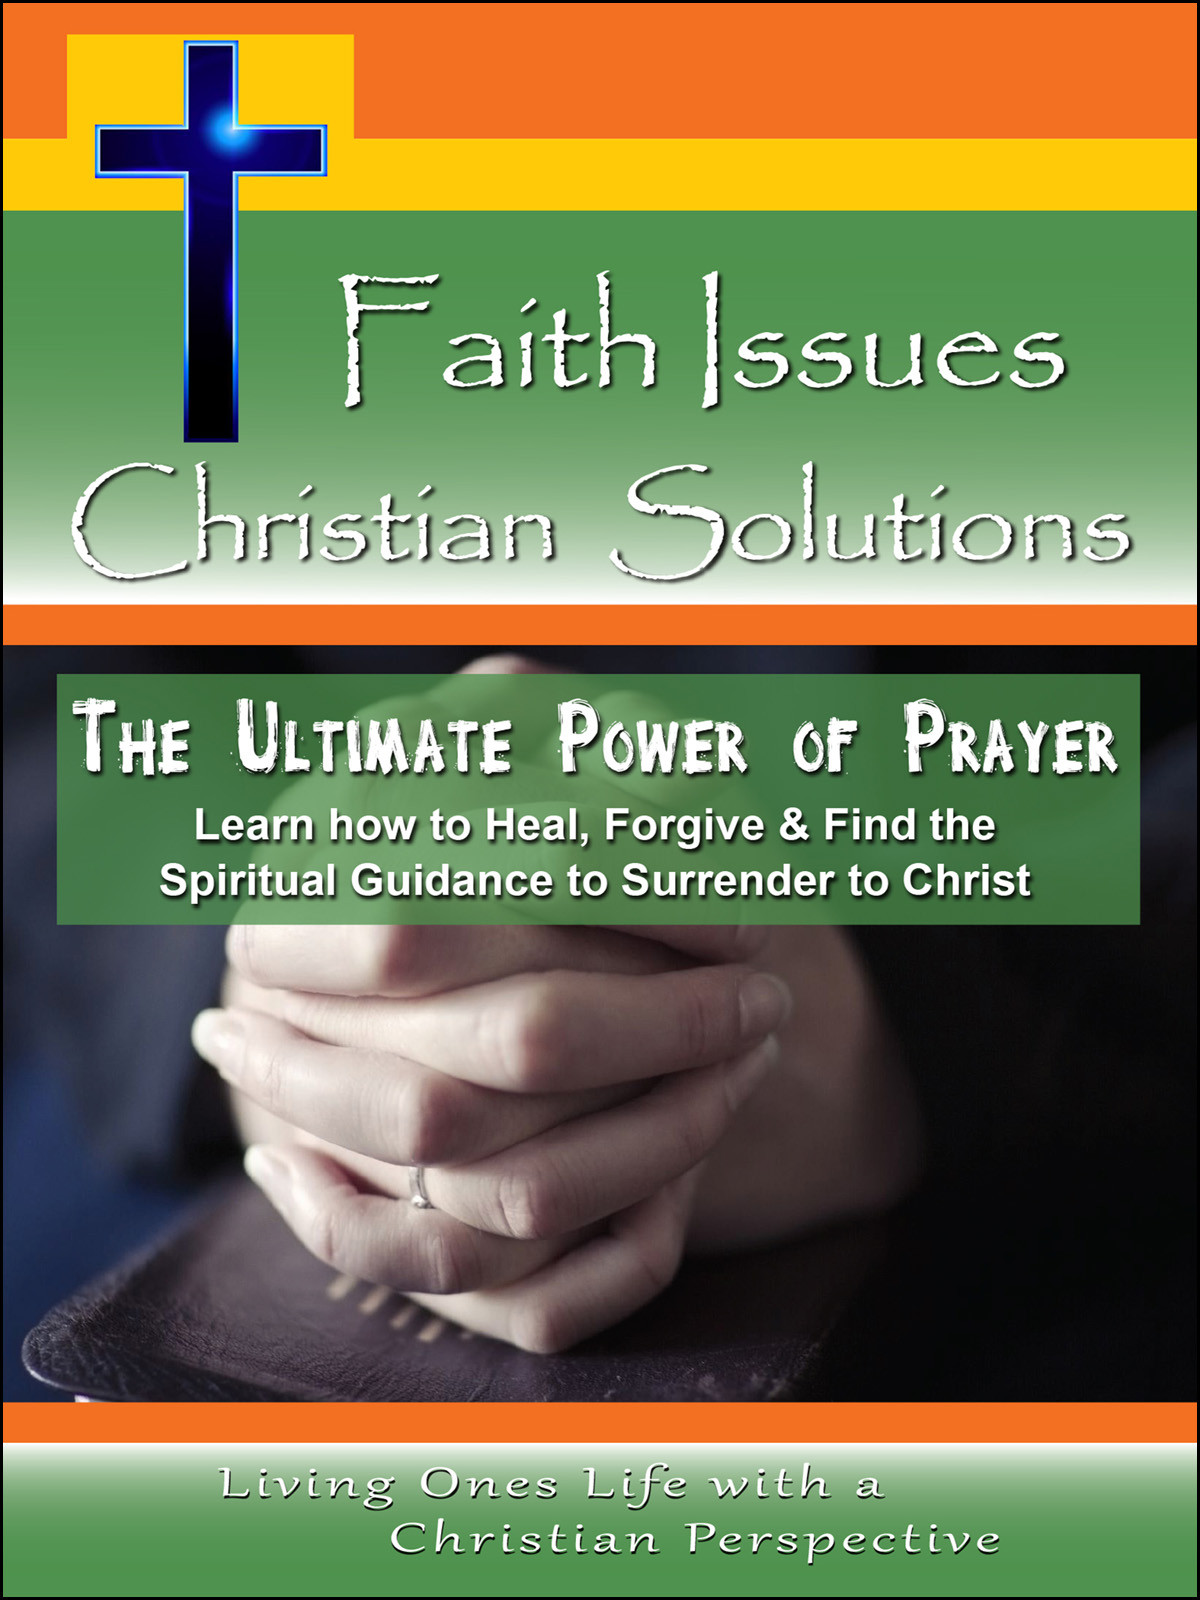 CH10046 - The Ultimate Power of Prayer Learn how to Heal, Forgive & Find the Spiritual Guidance to Surrender to Christ